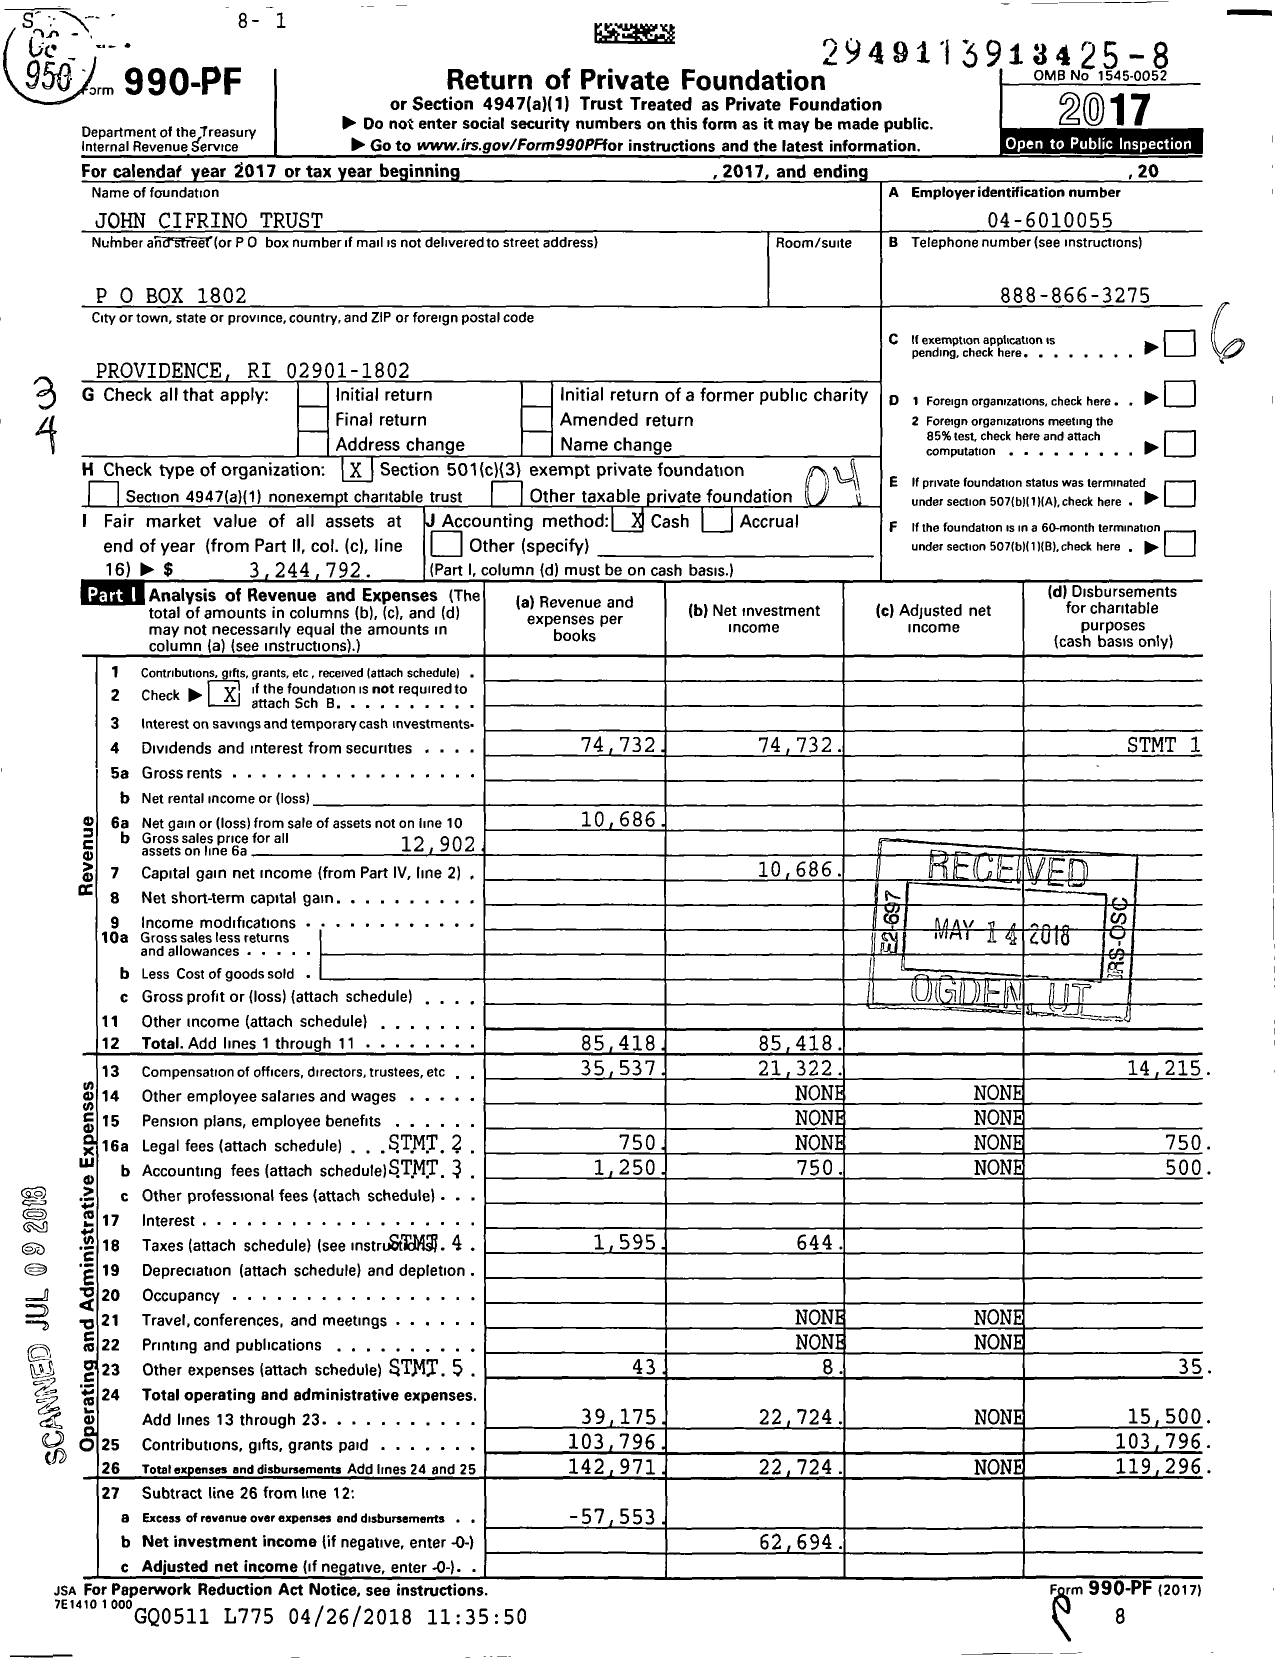 Image of first page of 2017 Form 990PF for John Cifrino Trust